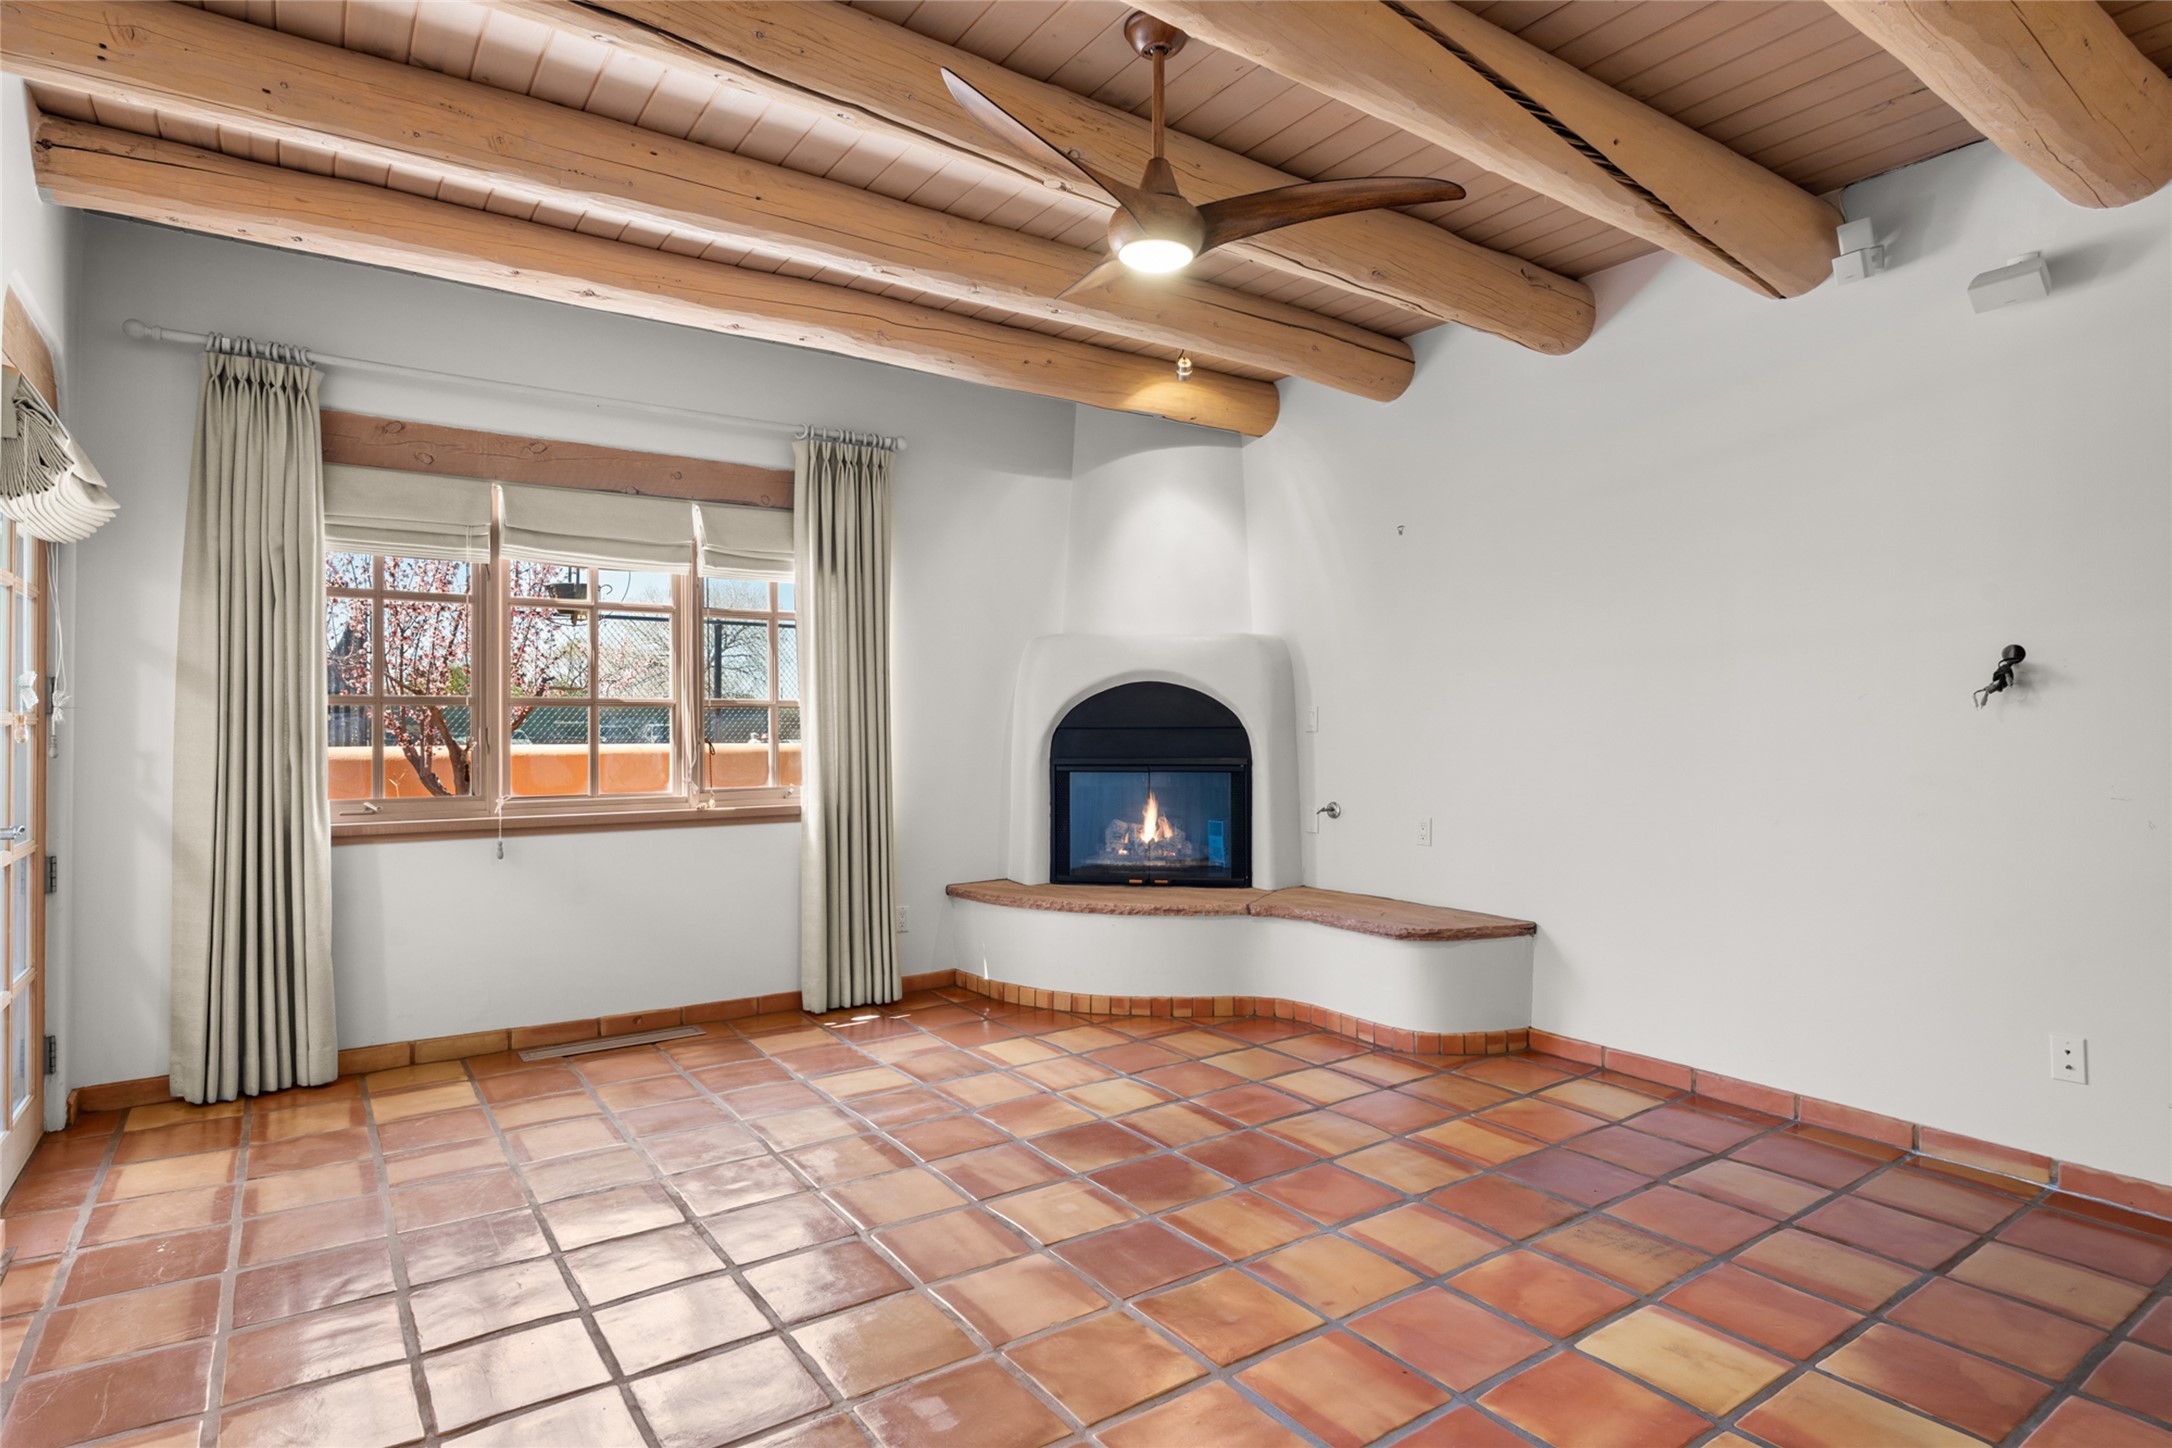 3101 Old Pecos Trail 154, Santa Fe, New Mexico 87505, 2 Bedrooms Bedrooms, ,2 BathroomsBathrooms,Residential,For Sale,3101 Old Pecos Trail 154,202401296